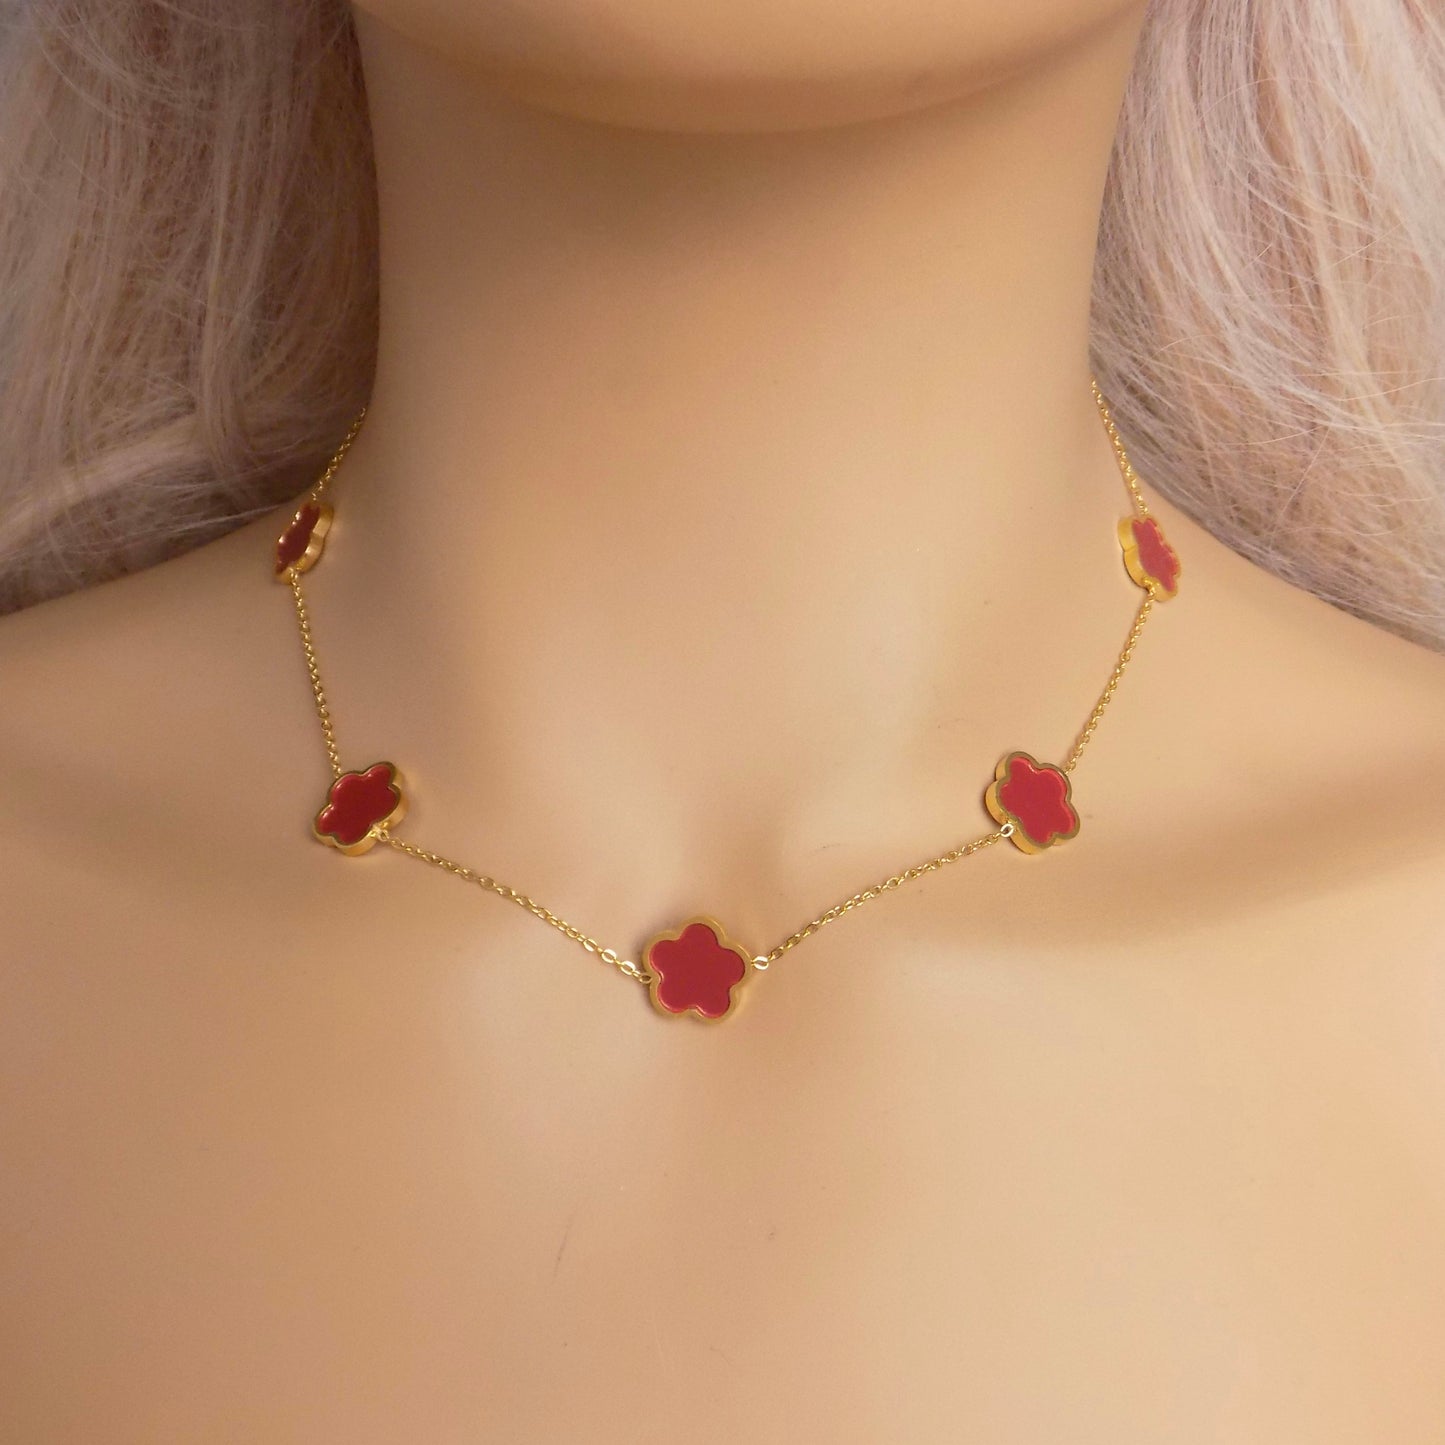 Red Clover Necklace 18K Gold Stainless Steel 5 Motif Flower Chain